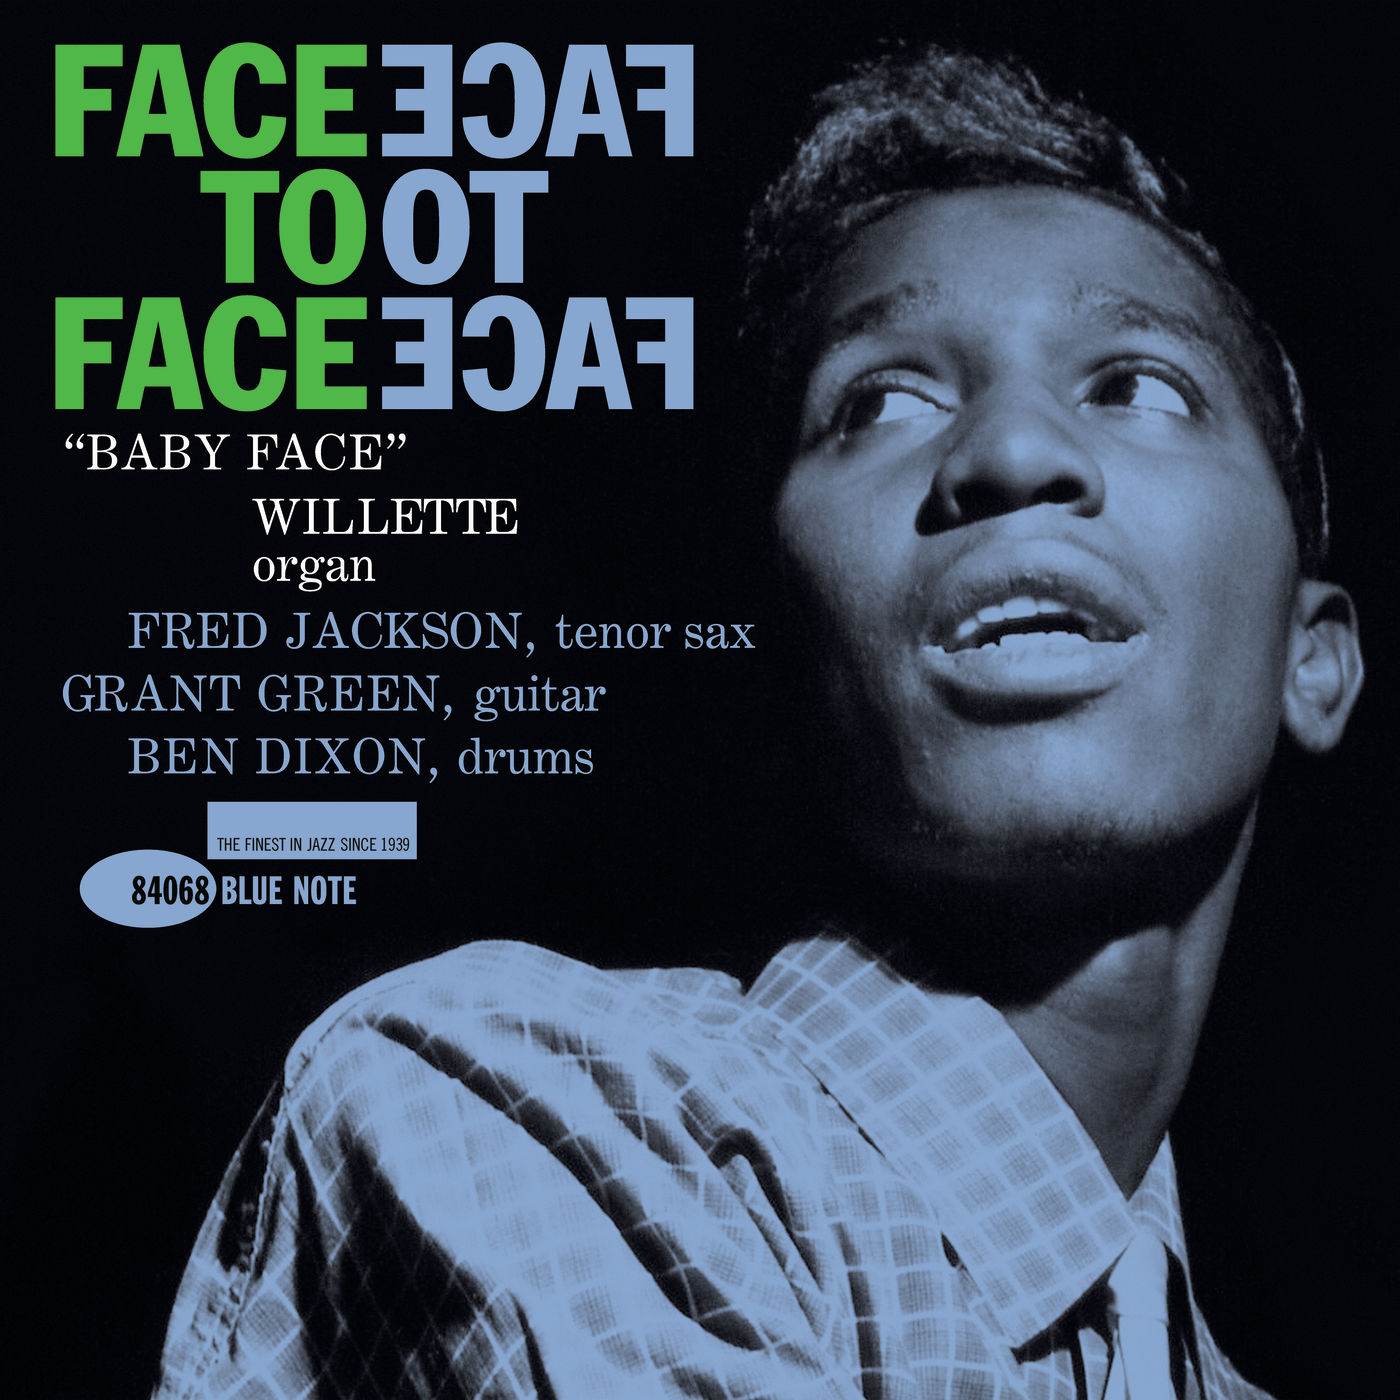 Baby Face Willette Quartet – Face To Face (Remastered) (1961/2019) [FLAC 24bit/96kHz]